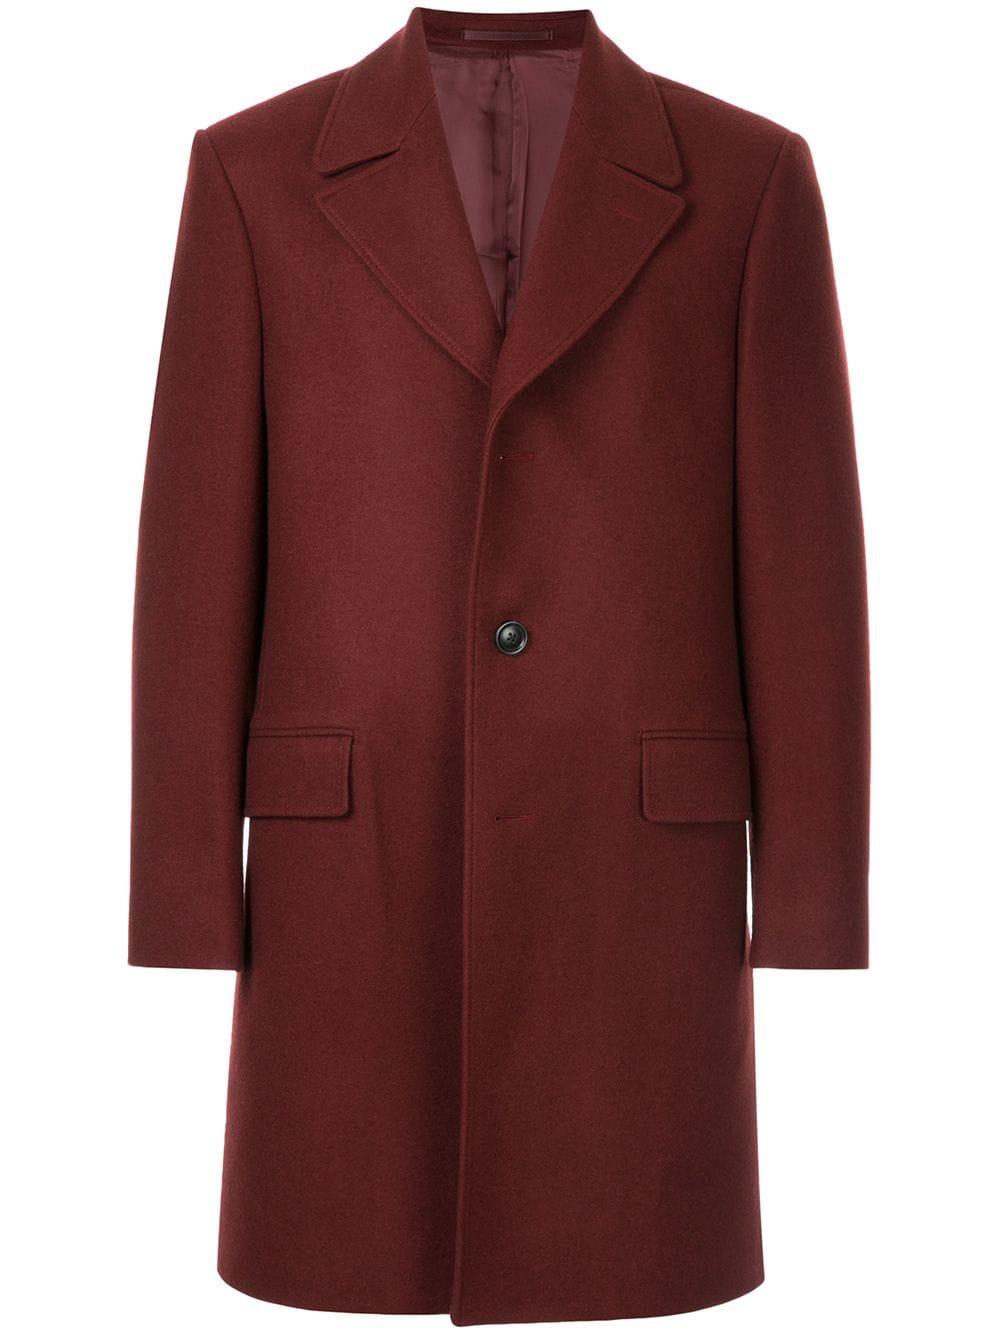 Gieves & Hawkes Wool Oversized Coat in Red for Men - Lyst